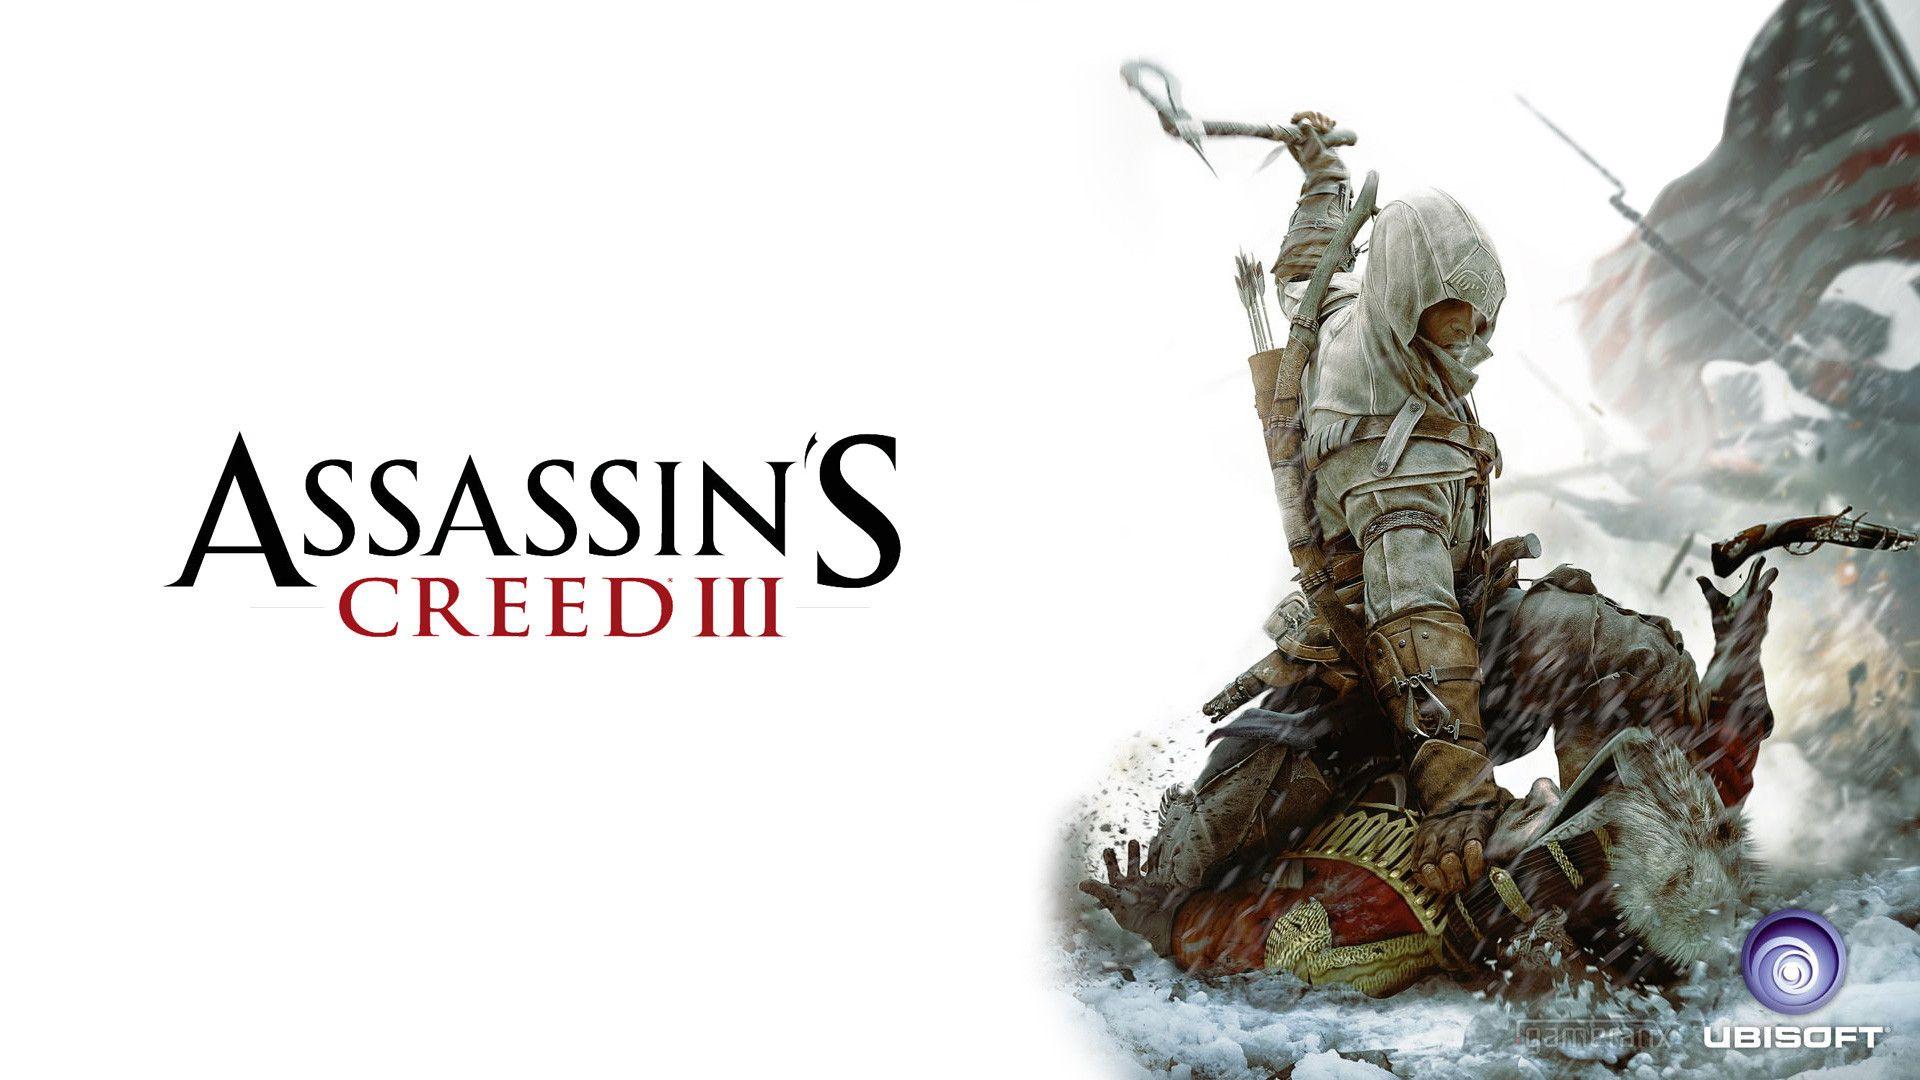 Assassin&;s Creed 3 Wallpaper in HD